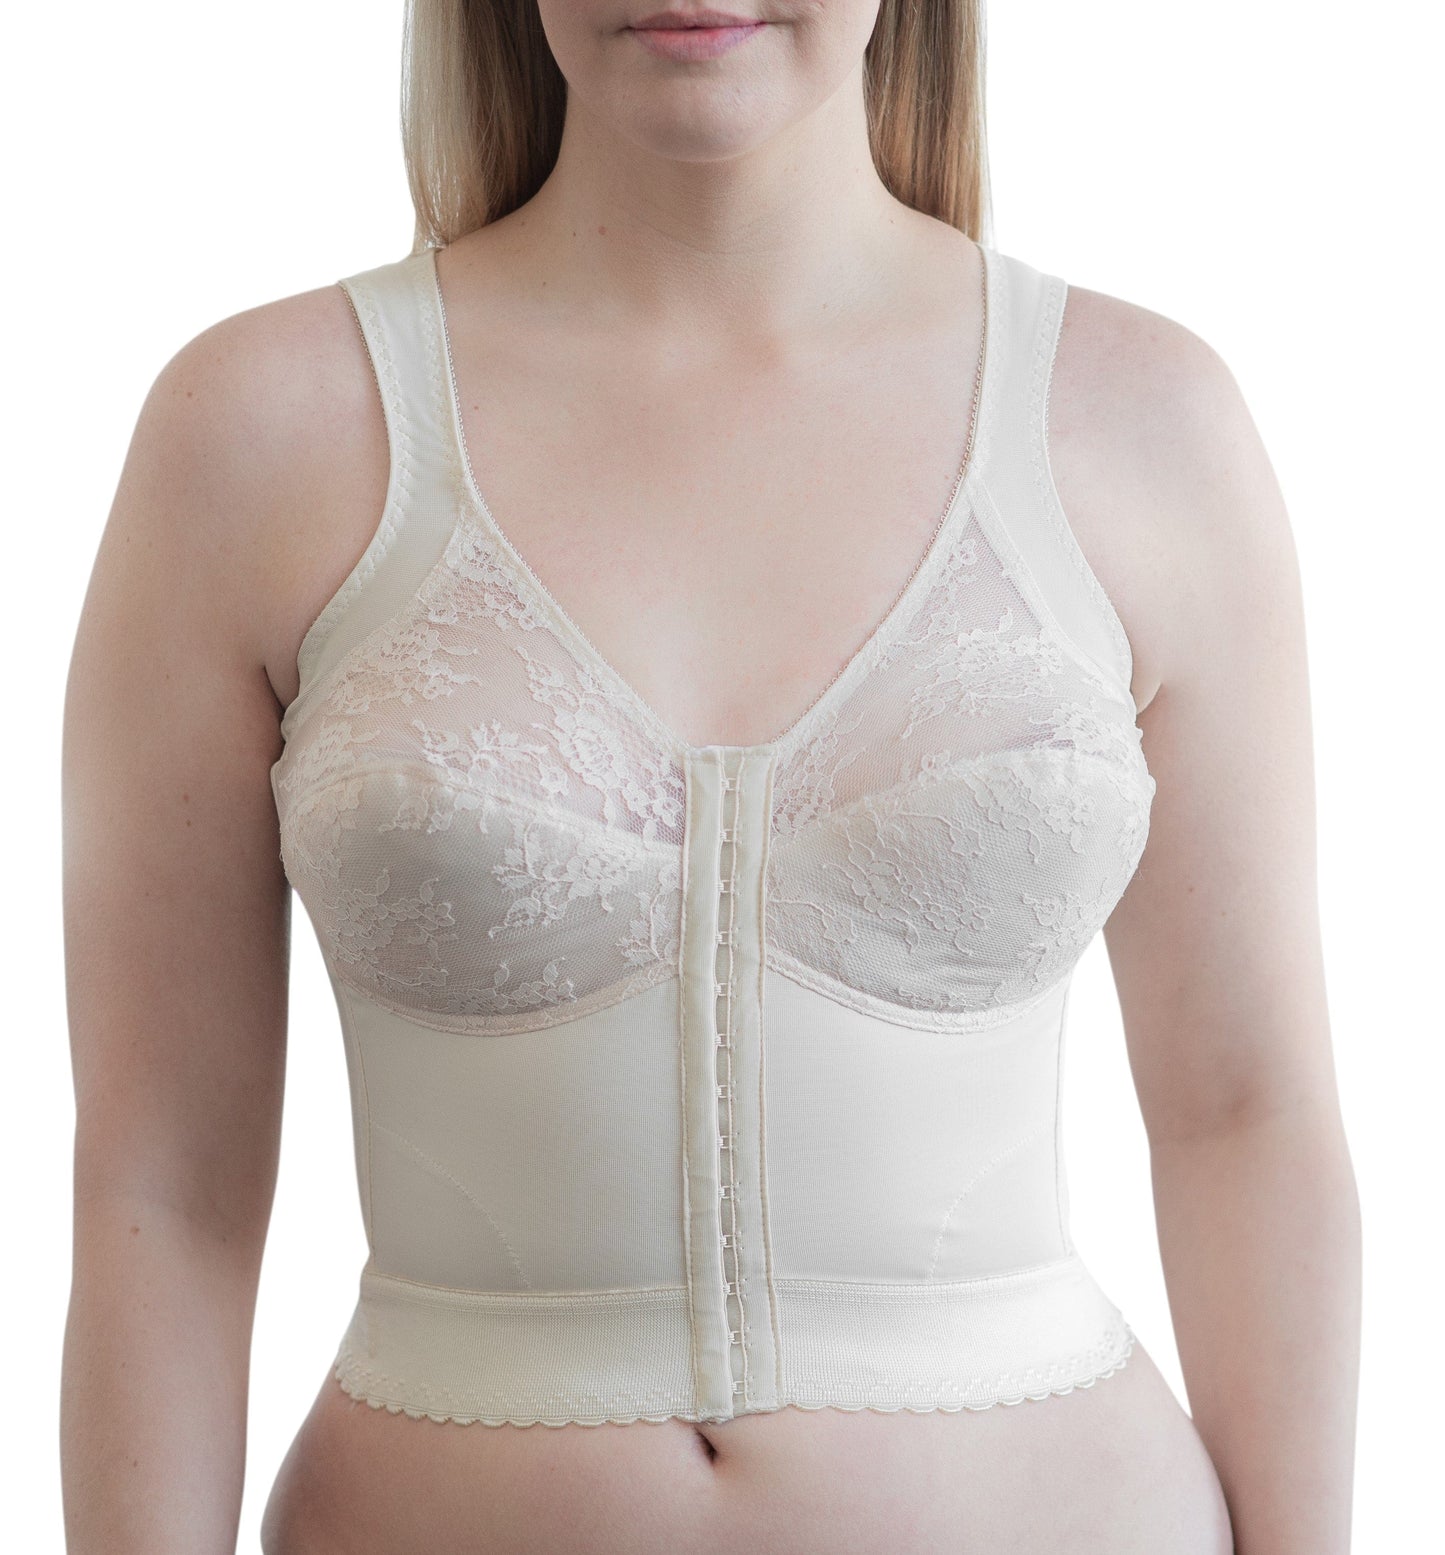 Style 9603 | Front Closure Back Support Long Line Bra - Blush